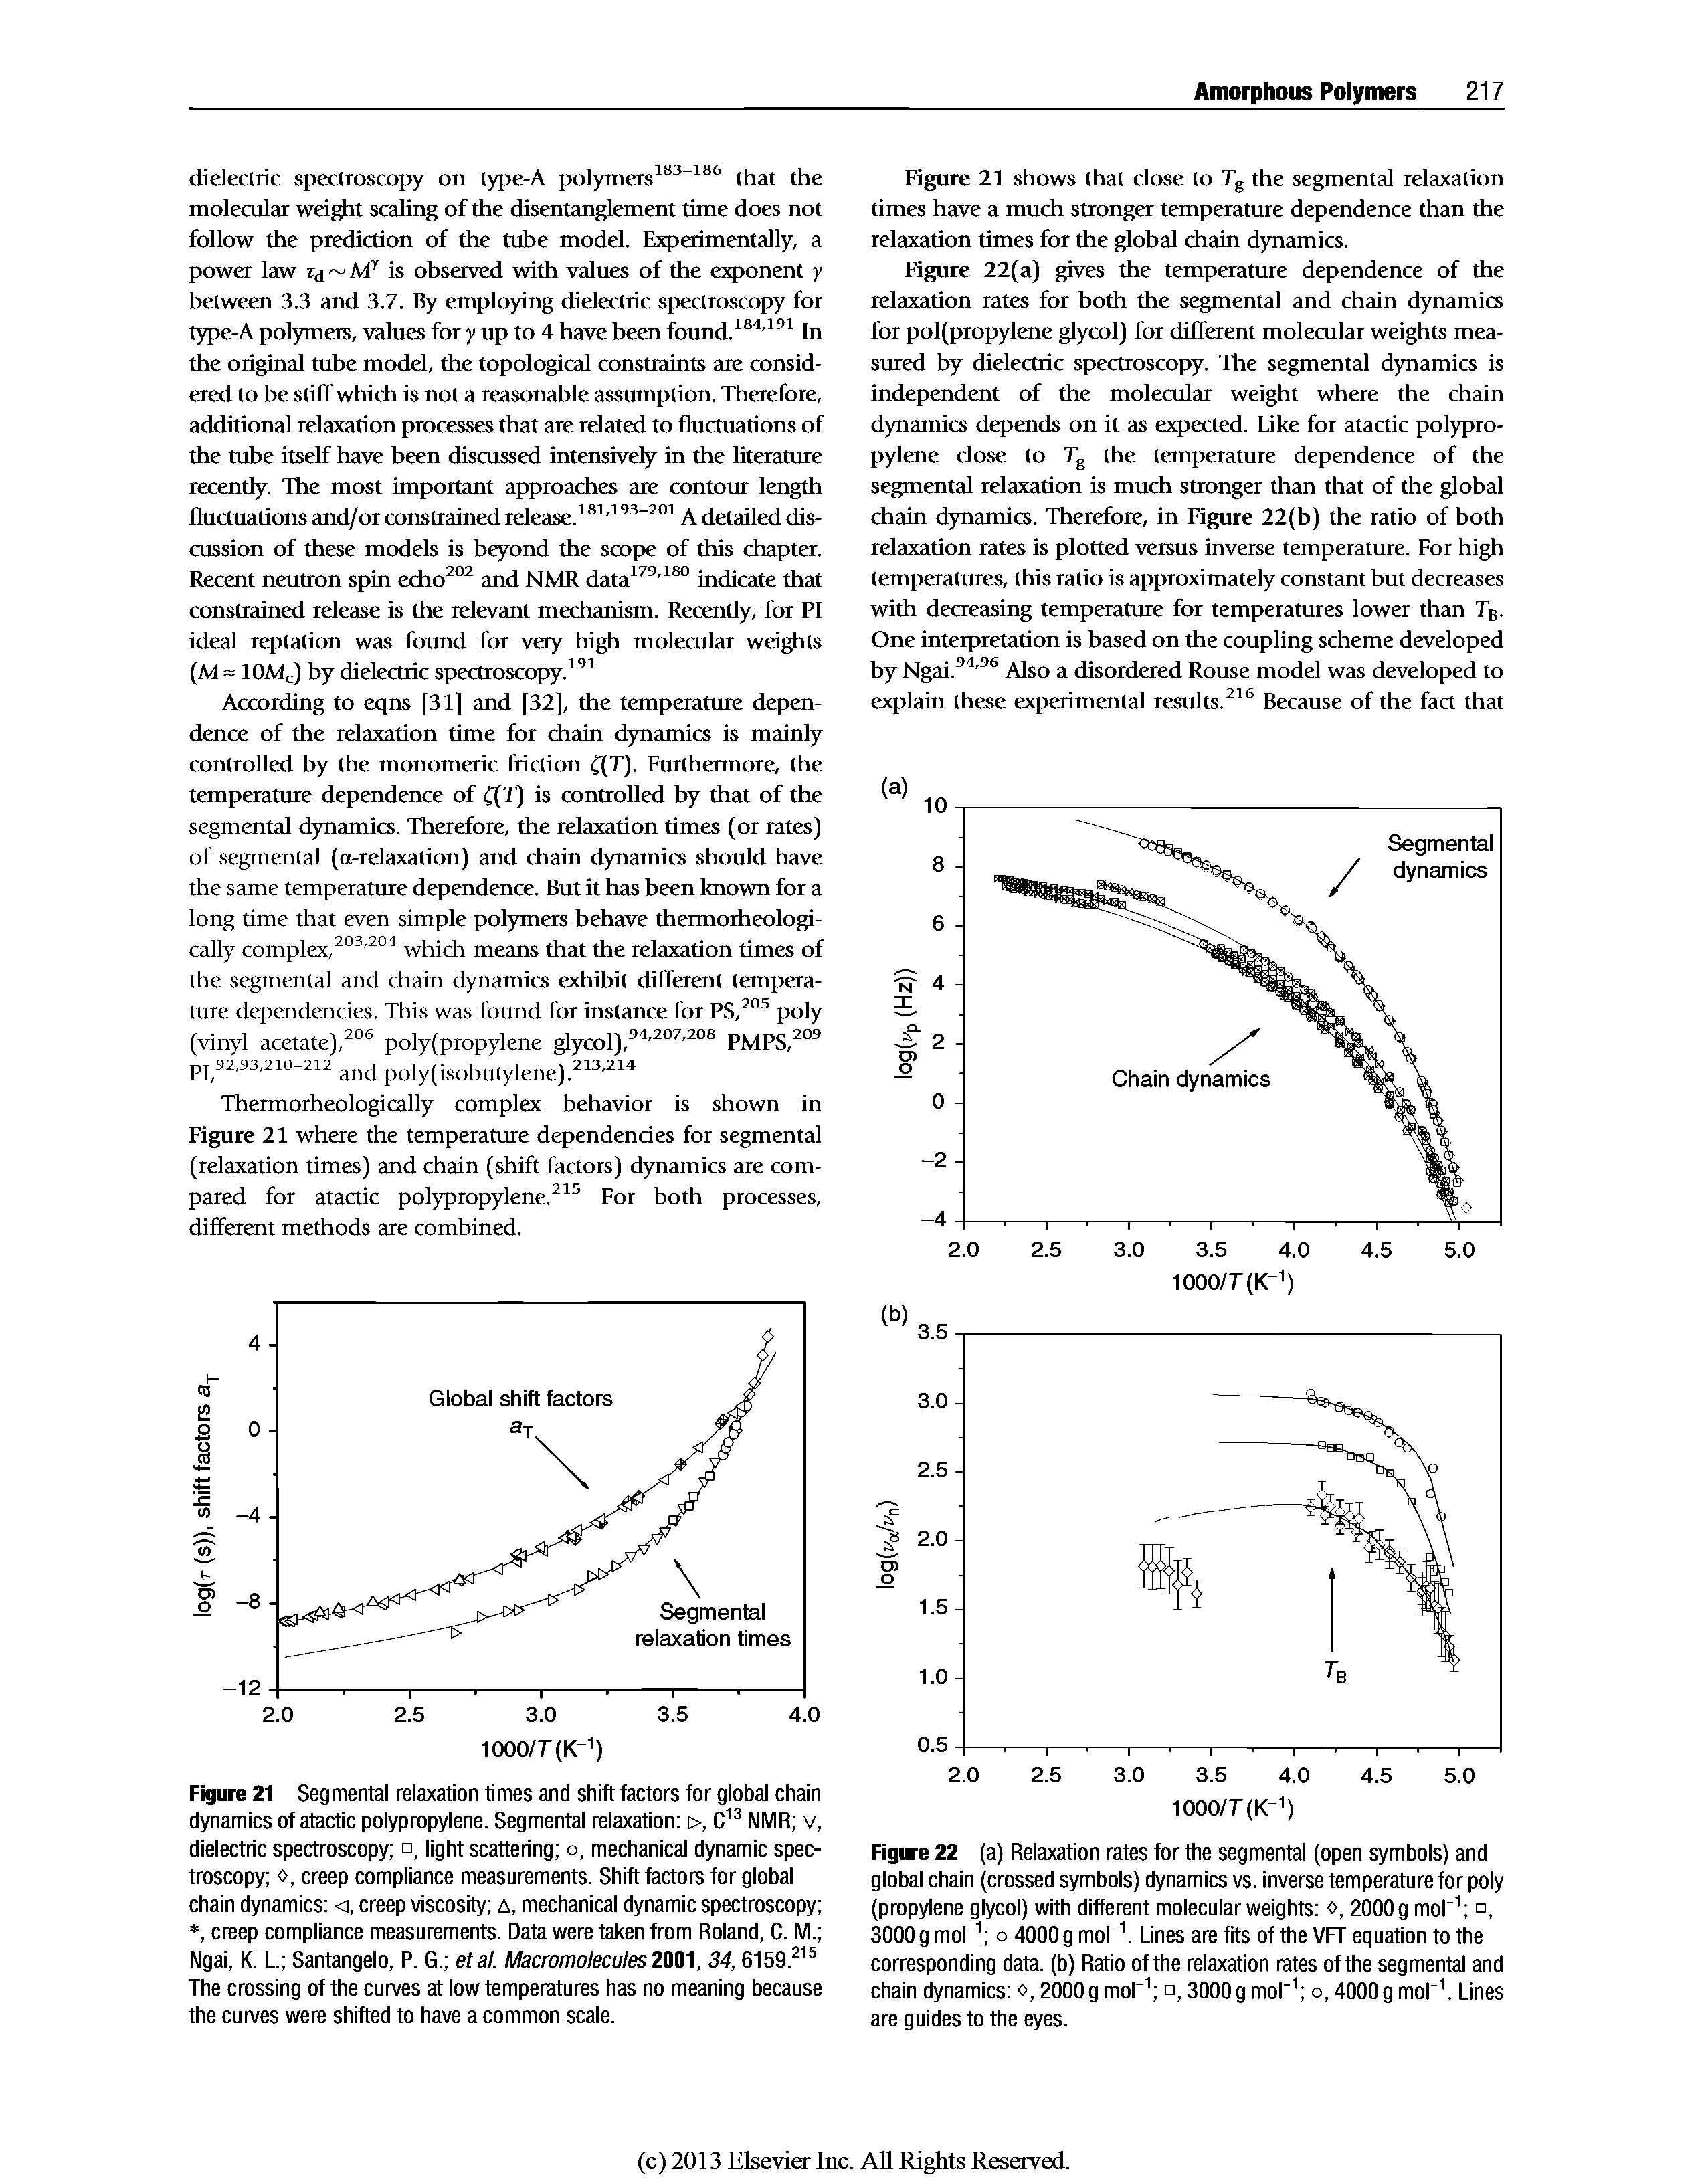 Figure 21 Segmental relaxation times and shift factors for global chain dynamics of atactic polypropylene. Segmental relaxation i>, NMR v, dielectric spectroscopy , light scattering o, mechanical dynamic spectroscopy 0, creep compliance measurements. Shift factors for global chain dynamics <i, creep viscosity a, mechanical dynamic spectroscopy , creep compliance measurements. Data were taken from Roland, C. M. Ngai, K. L. Santangelo, P. G. etal. Macromolecules 200, 34,6159. The crossing of the curves at low temperatures has no meaning because the curves were shifted to have a common scale.